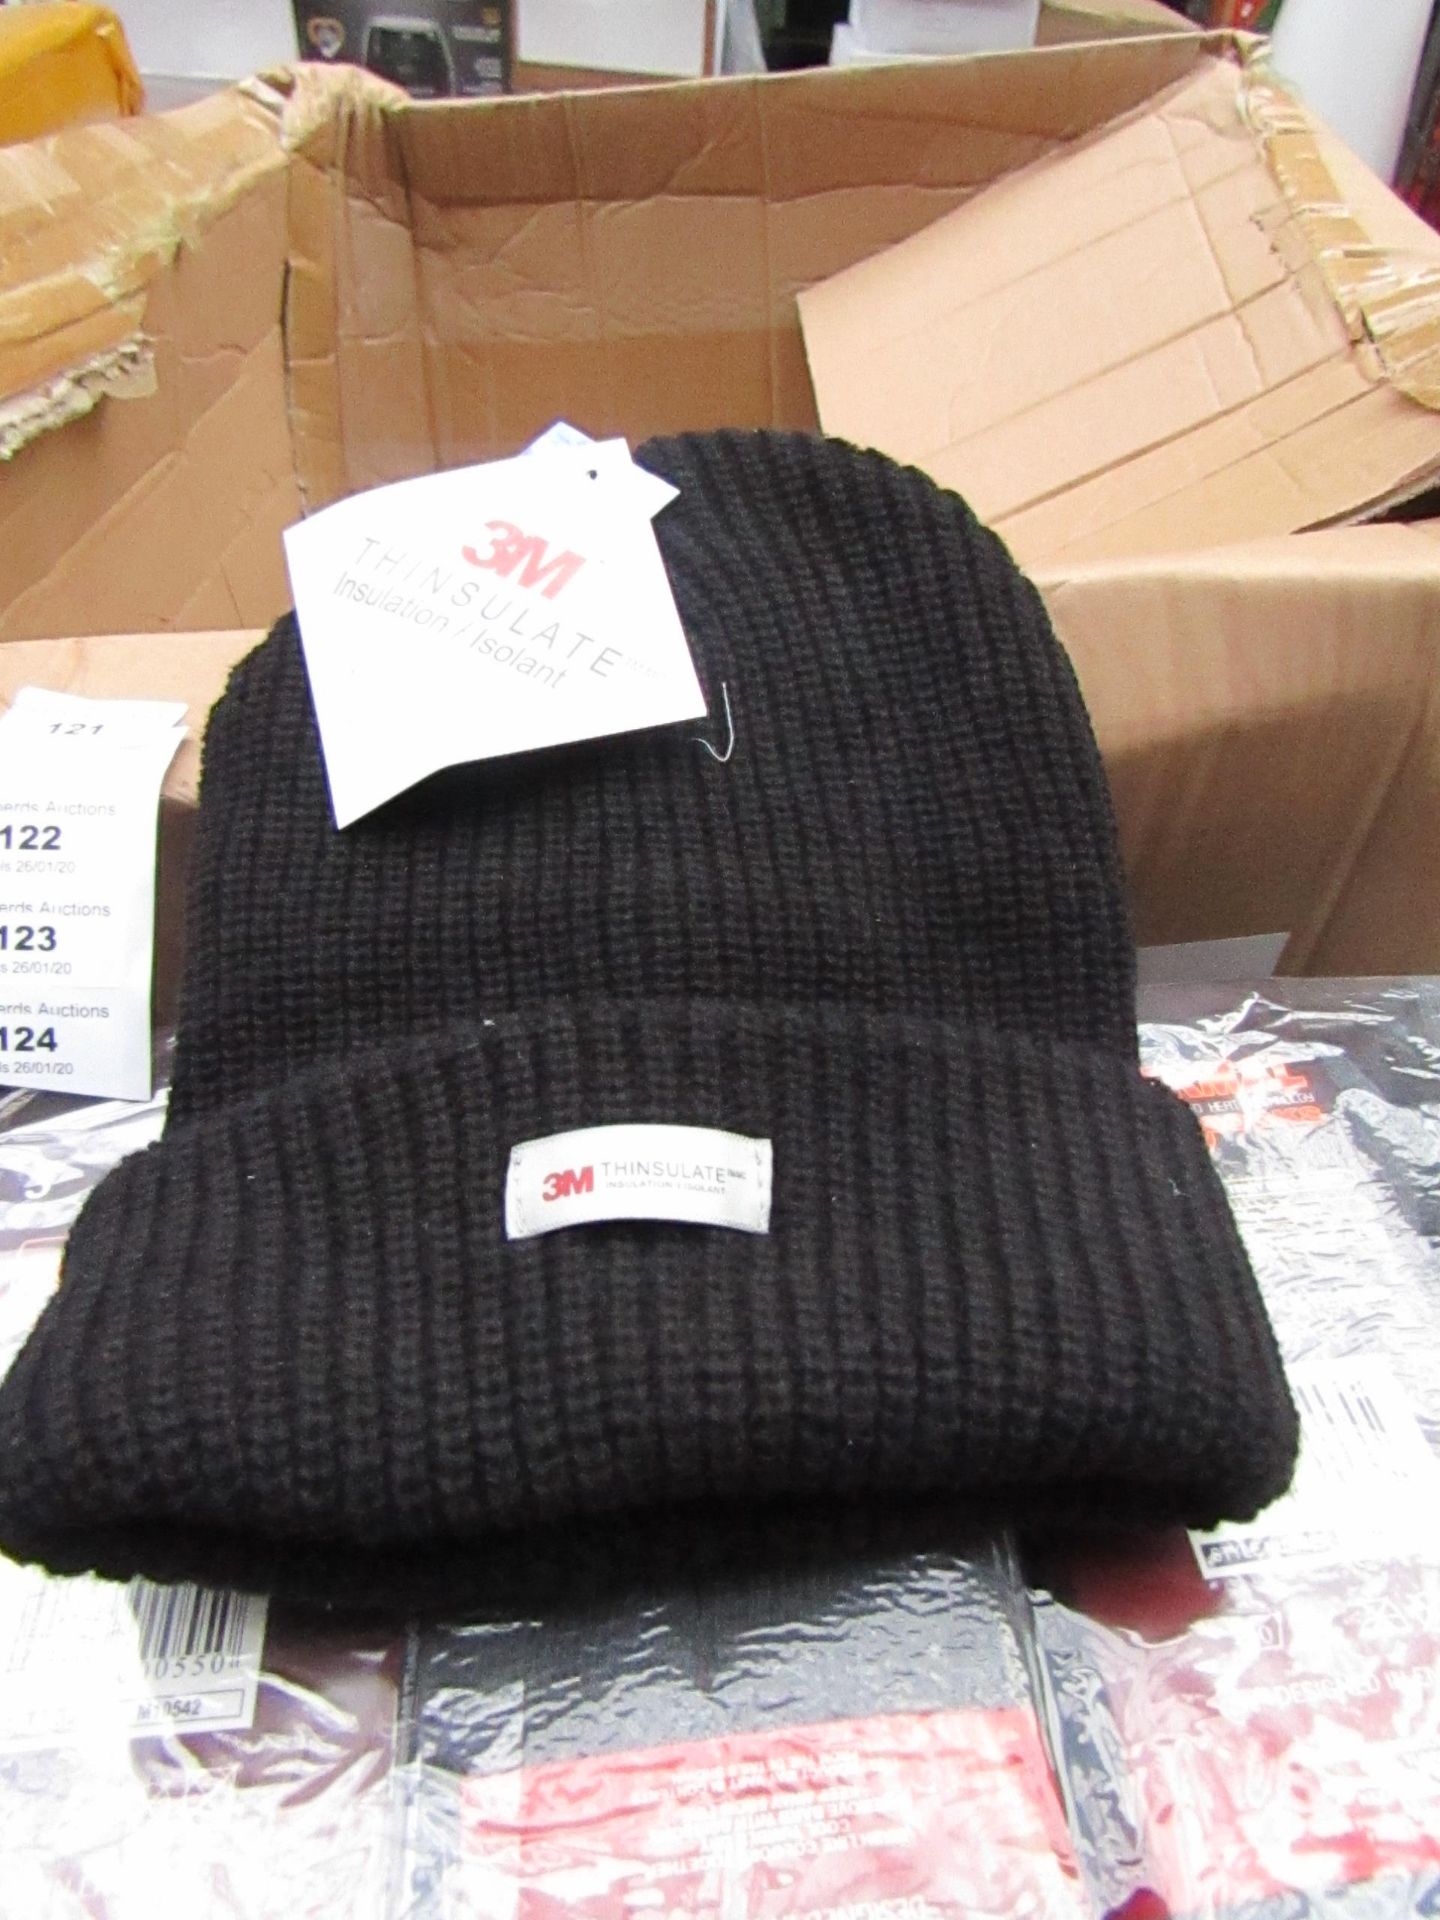 6x 3M thinsulated beanies, one size, new with tags.